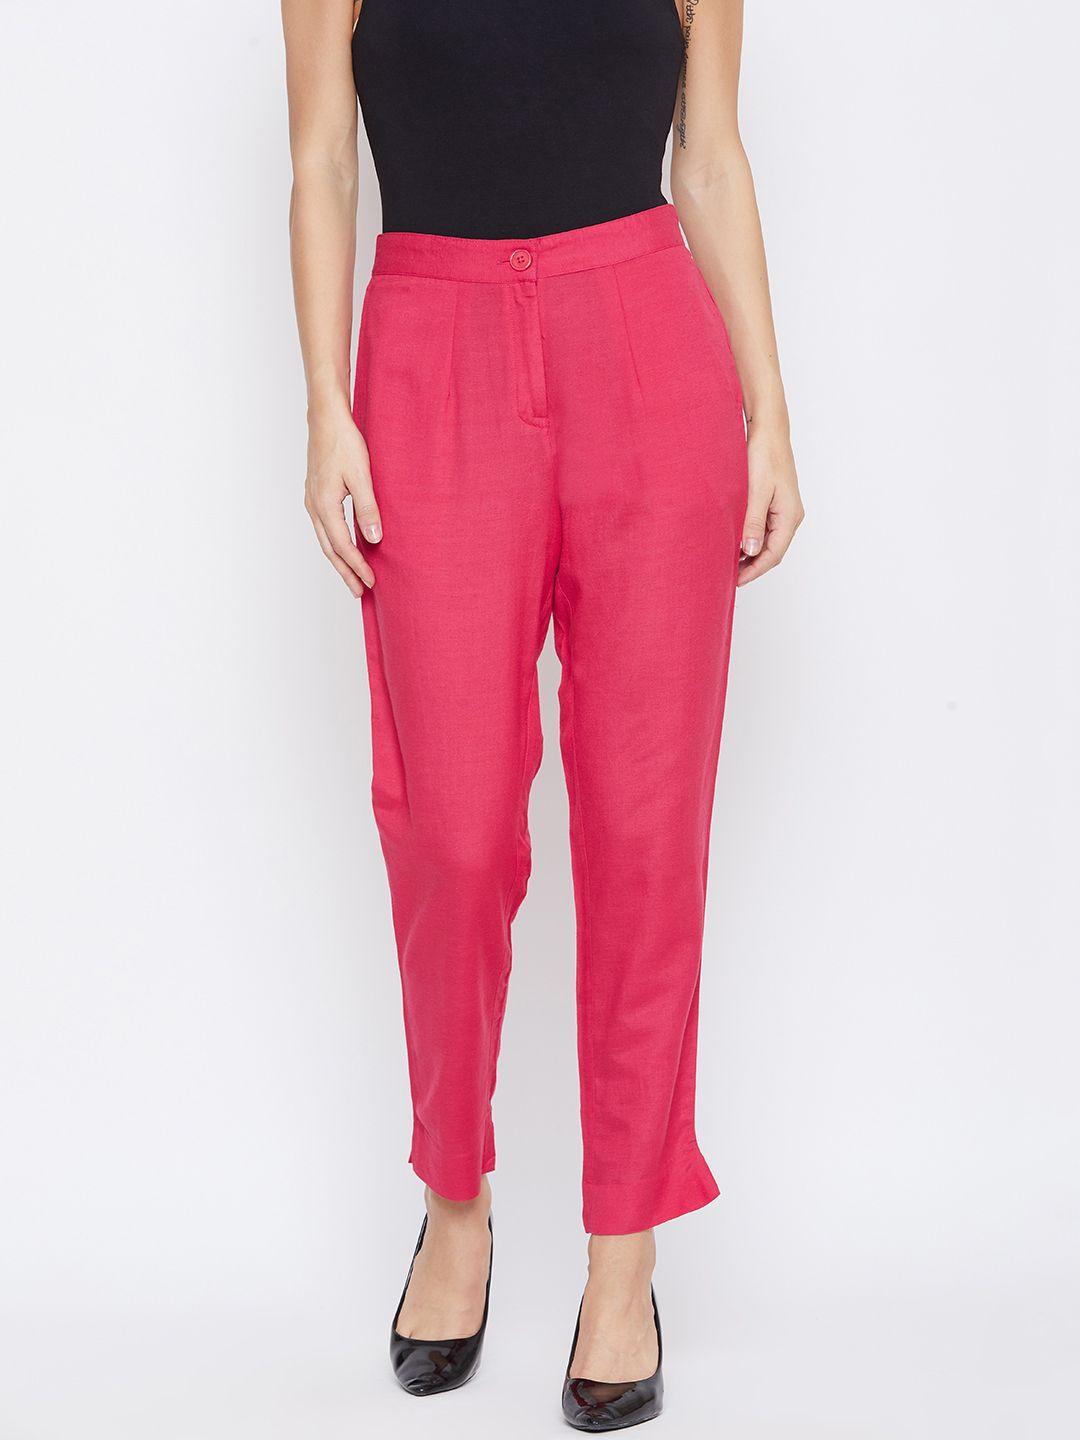 fabglobal women pink relaxed slim fit solid regular trousers